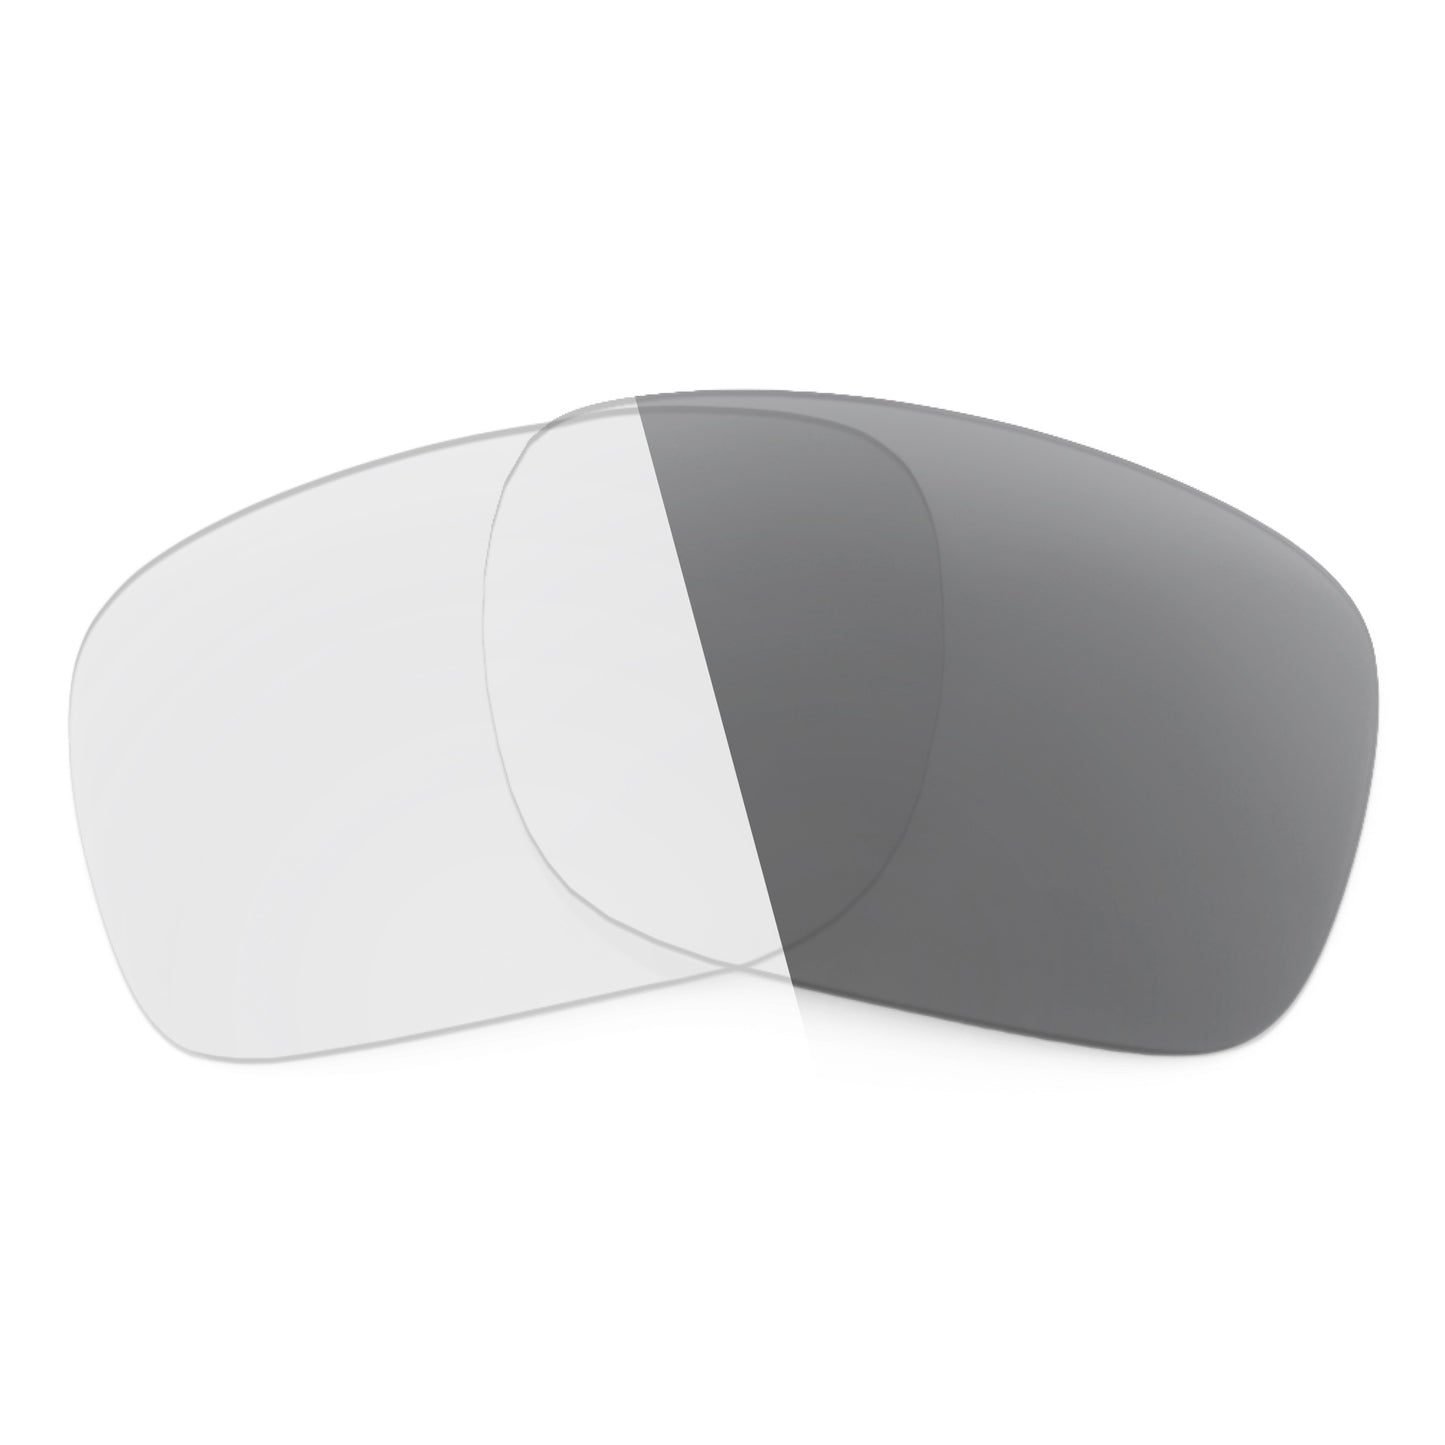 Revant replacement lenses for Ray-Ban RB3524 57mm Non-Polarized Adapt Gray Photochromic